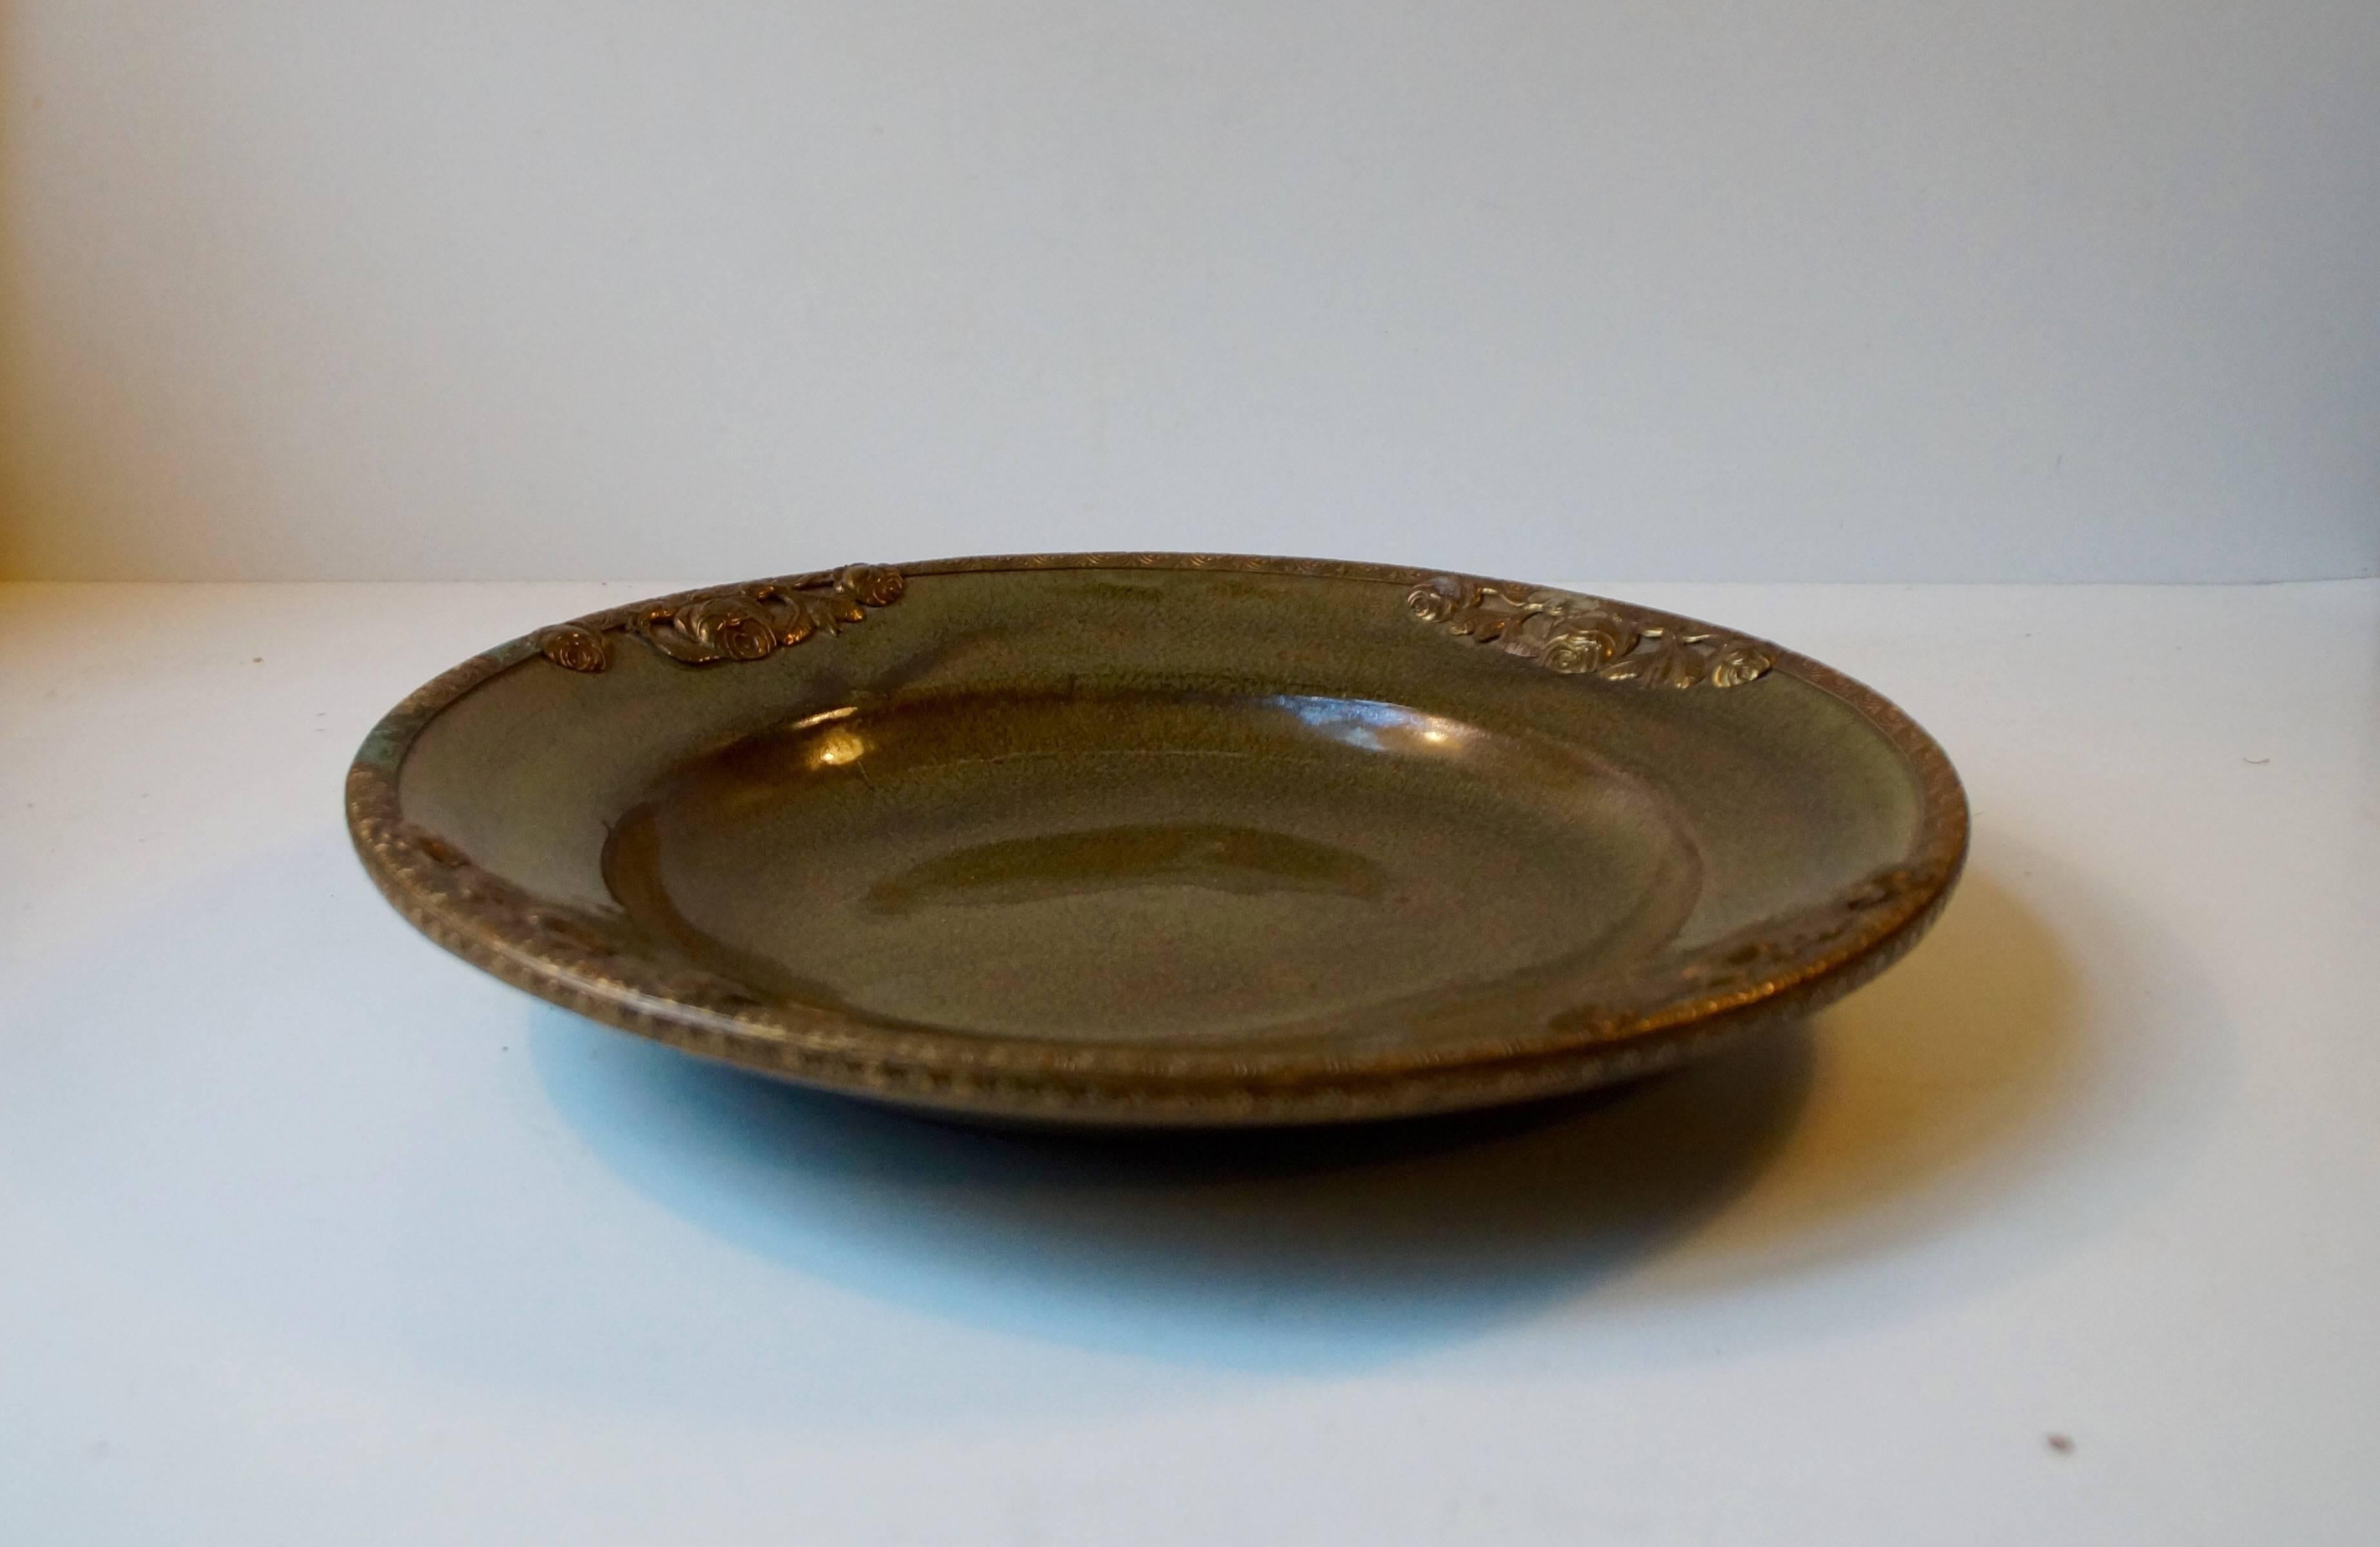 Rare decorative dish for fruit manufactured by Michael Andersen in Denmark, circa 1910. It has a rich and deep dark green glaze with nuances of different colors. The Perimeter is decorated with floral impression set in patinated brass.